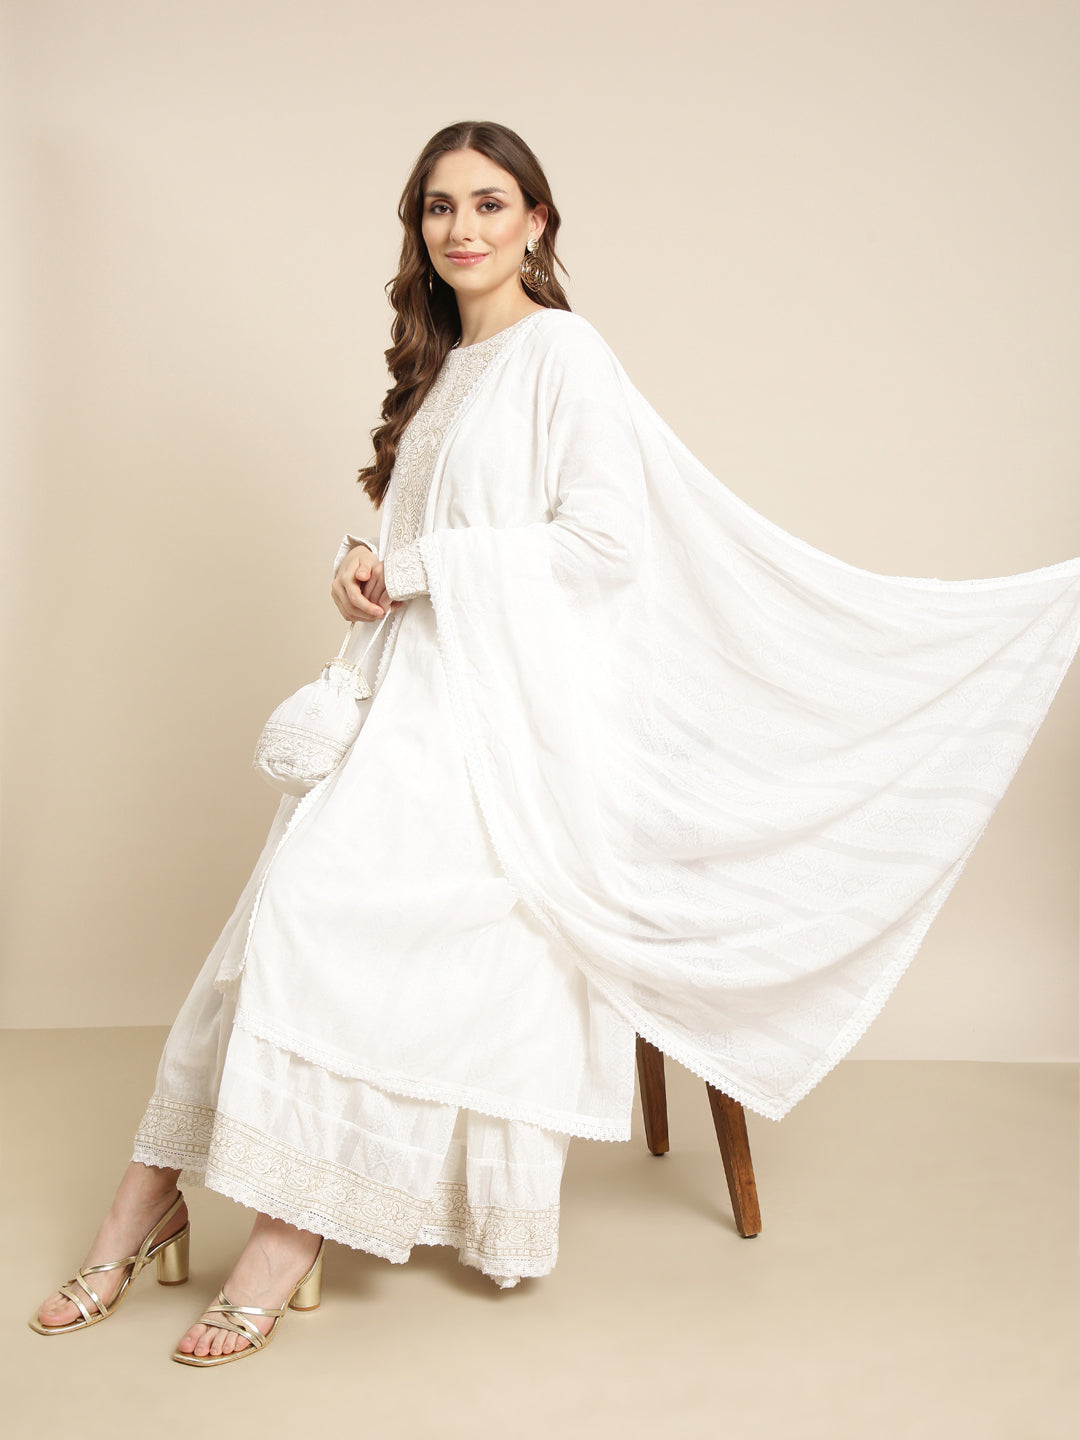 Women Anarkali Off White Floral Kurta and Trousers Set Comes With Dupatta and Potli Bag